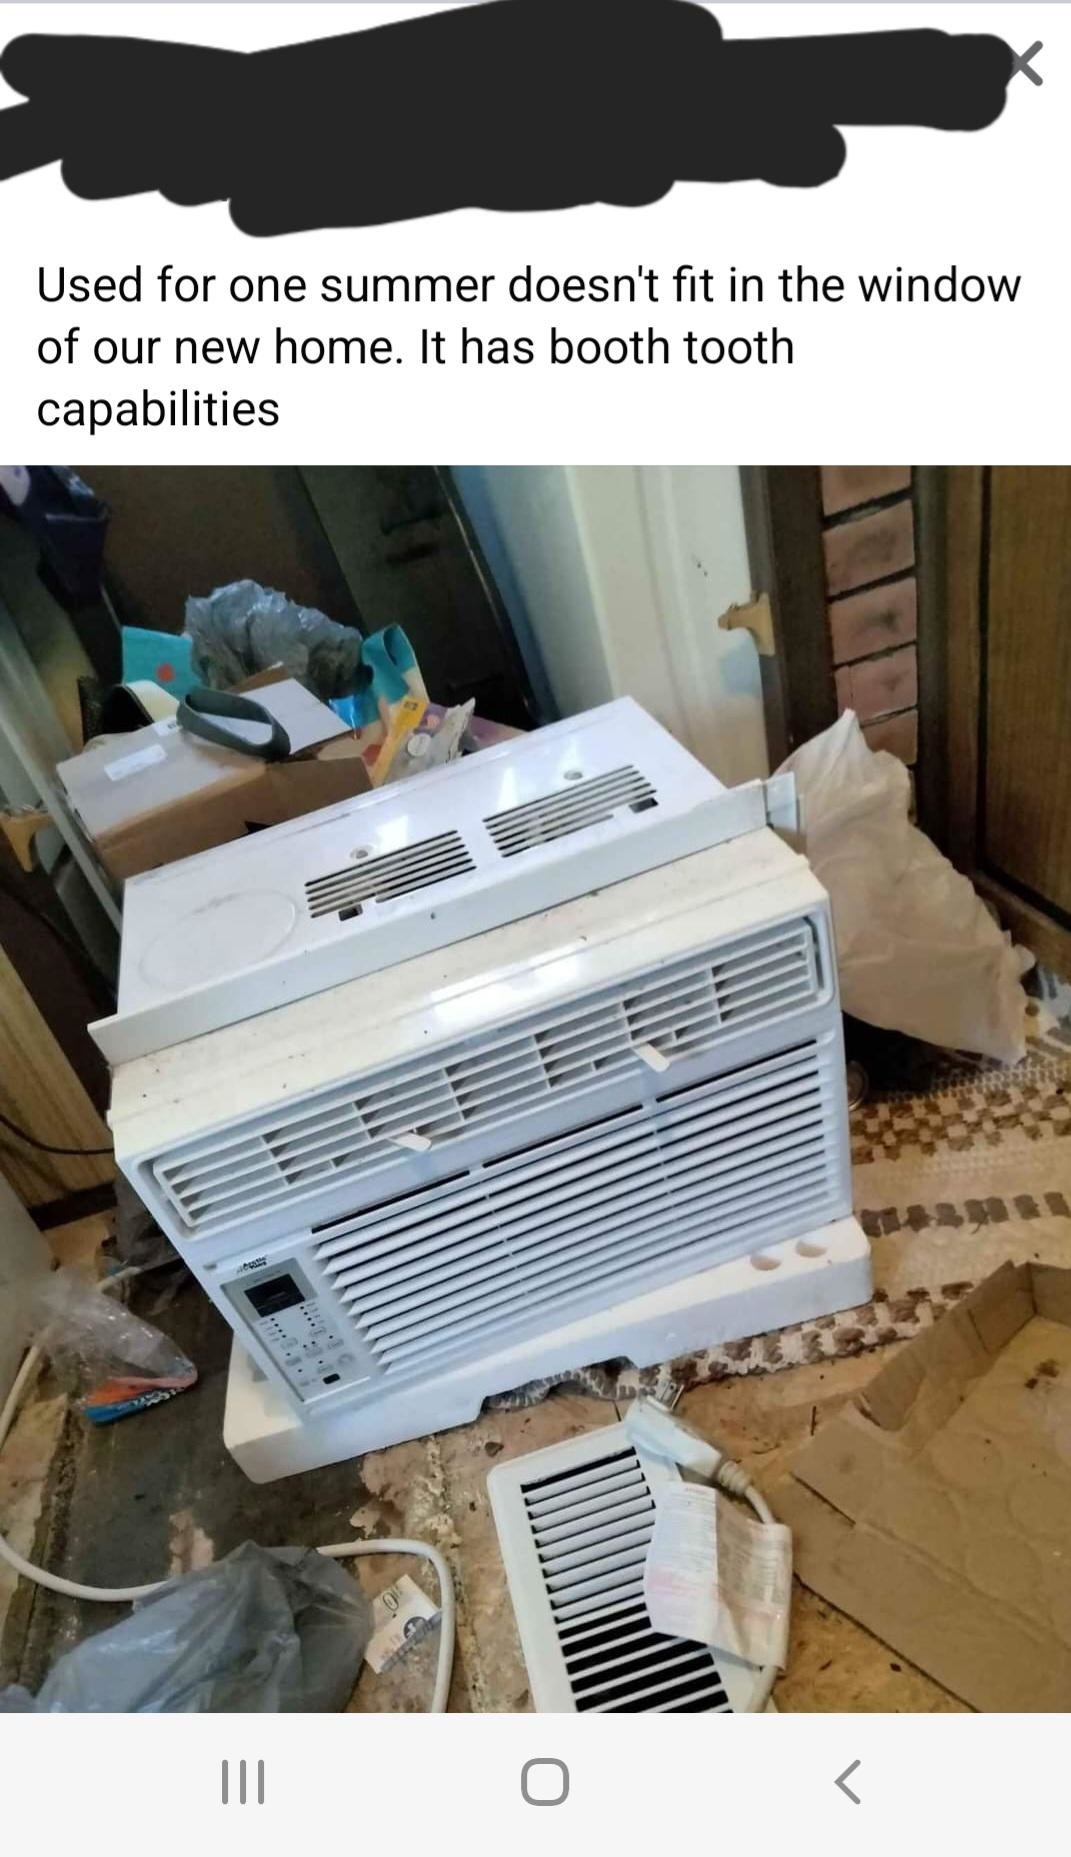 marketplace ad reading air conditioner with booth tooth capabilities